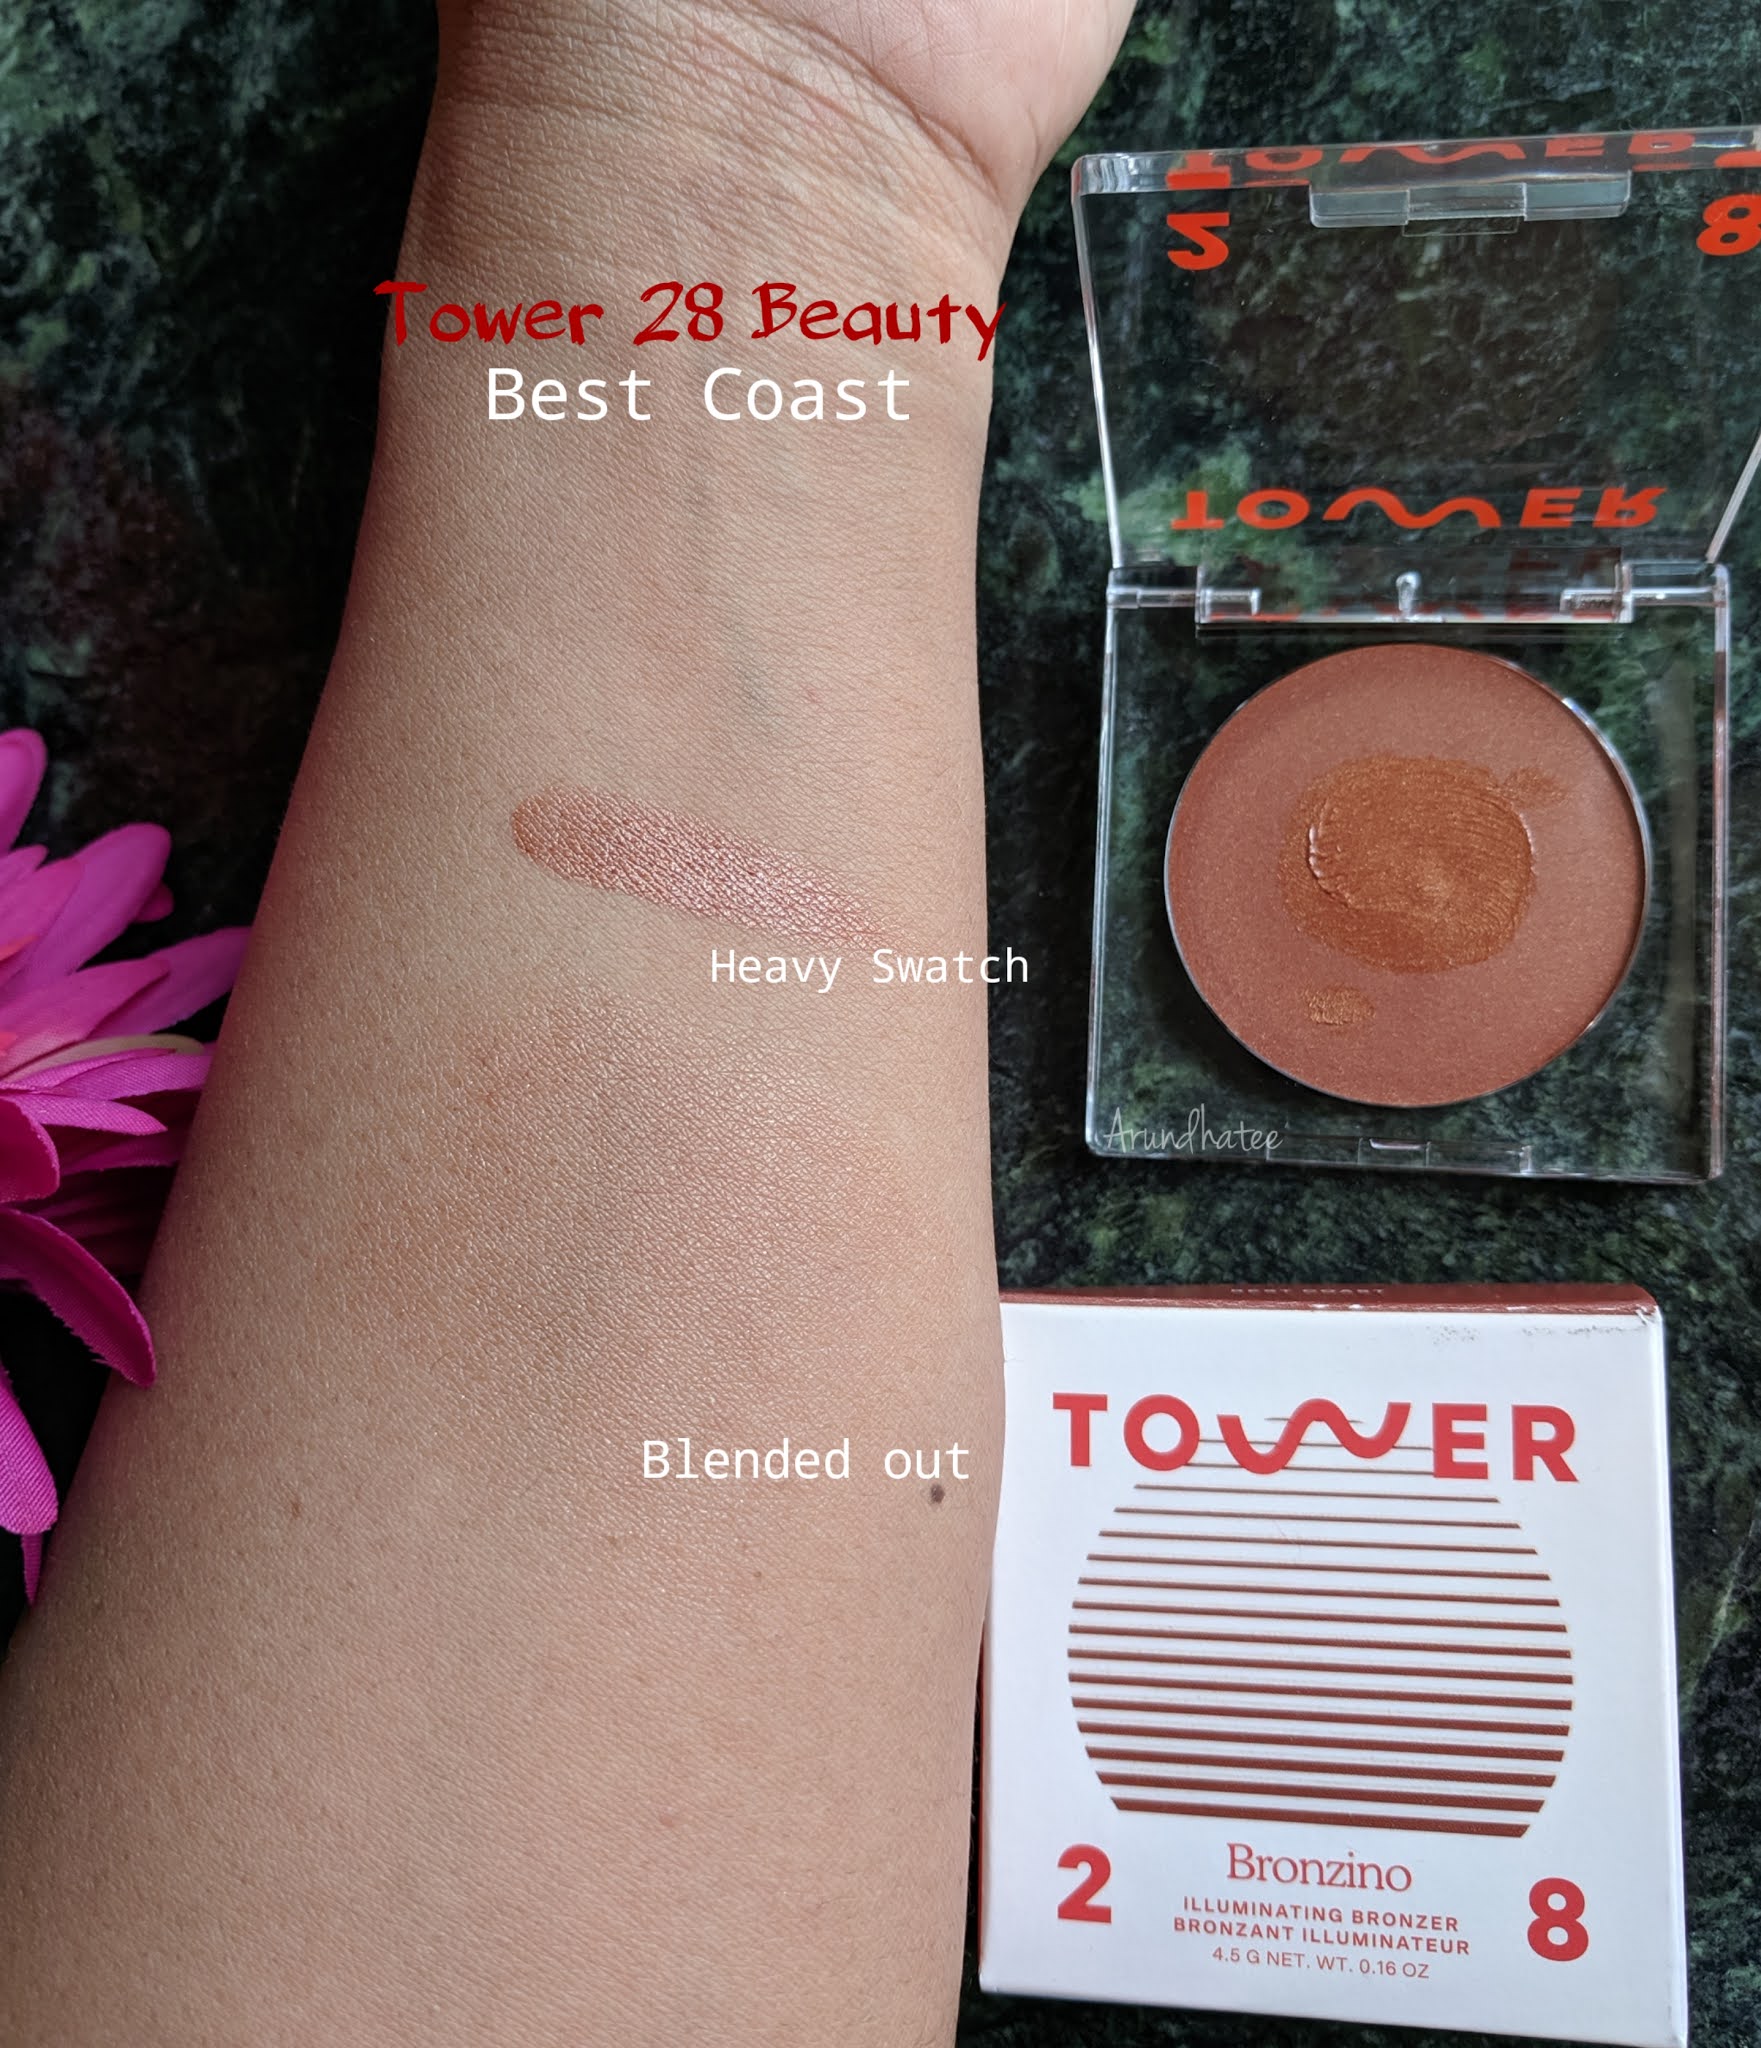 Discovering me: TOWER 28 BEAUTY Bronzino Illuminating Bronzer in "Best Coast" ::: Review &